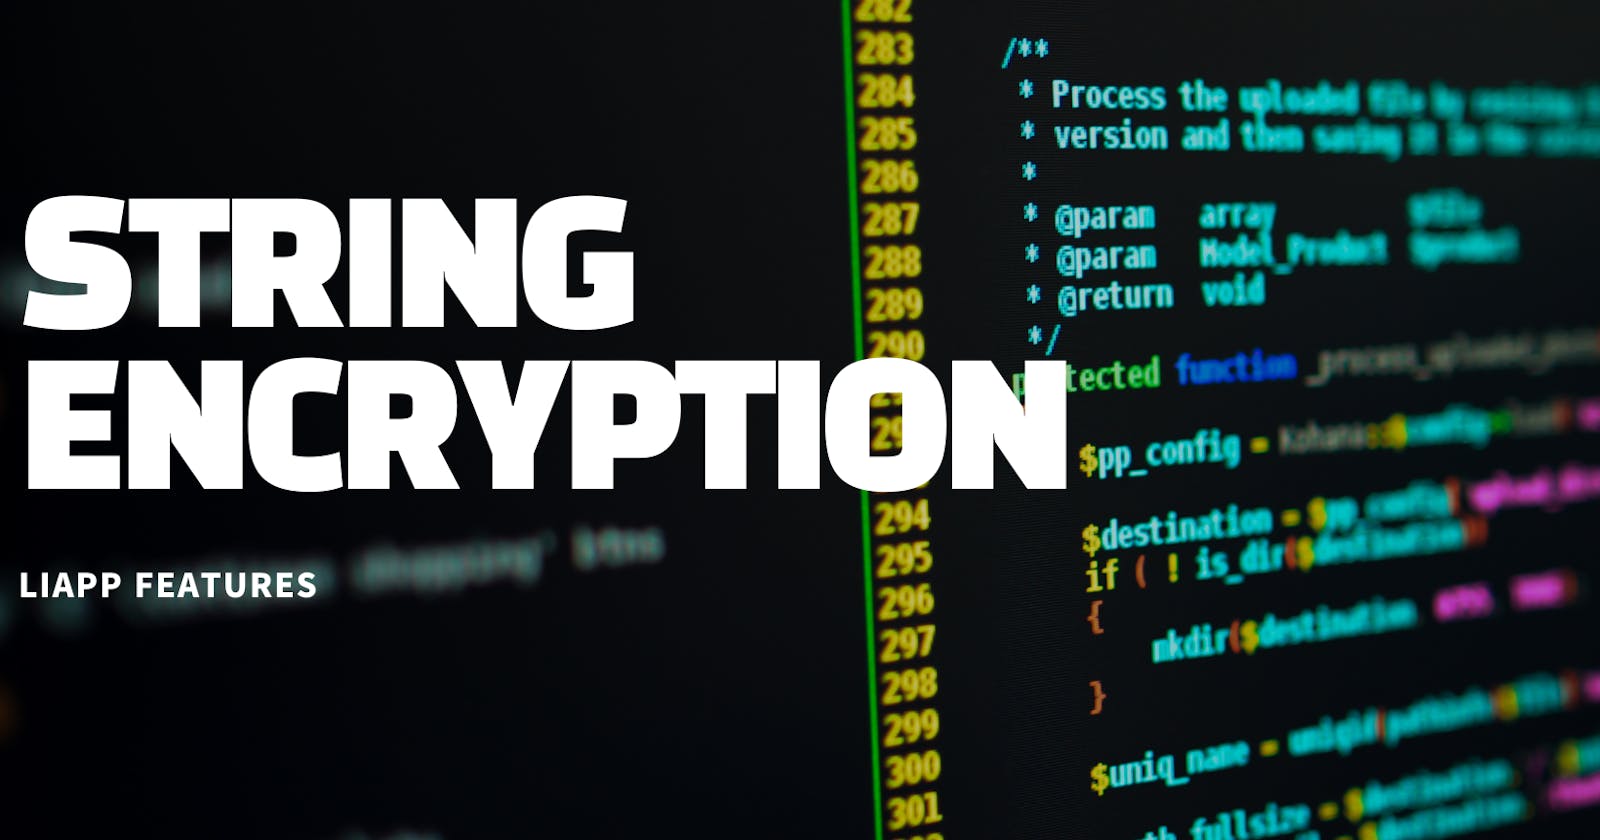 [LIAPP FEATURES] String Encryption